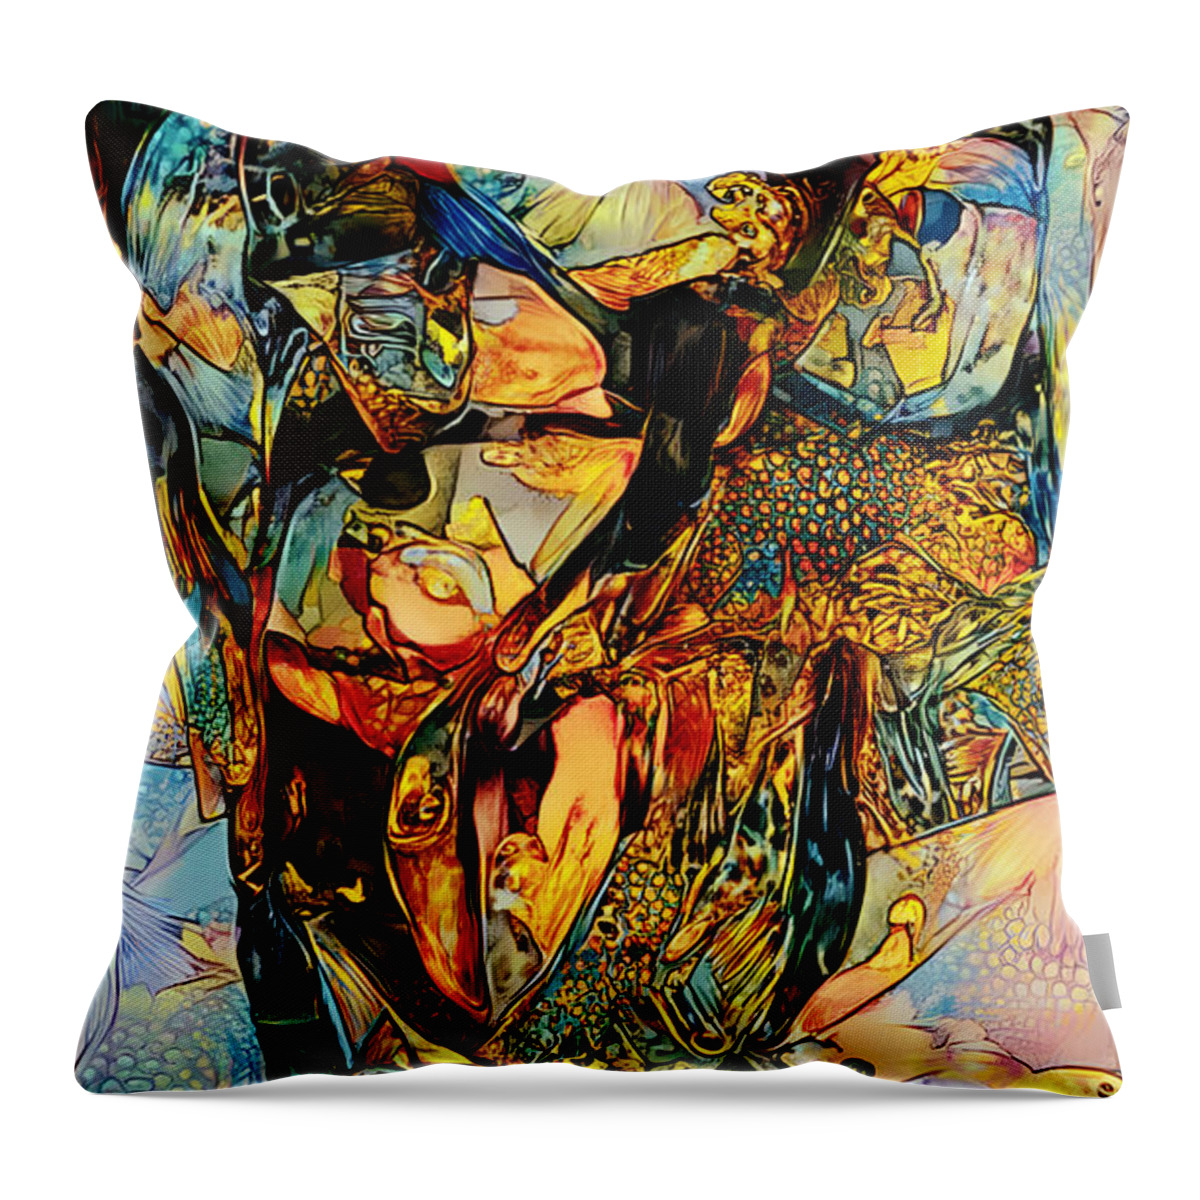 Contemporary Art Throw Pillow featuring the digital art 37 by Jeremiah Ray